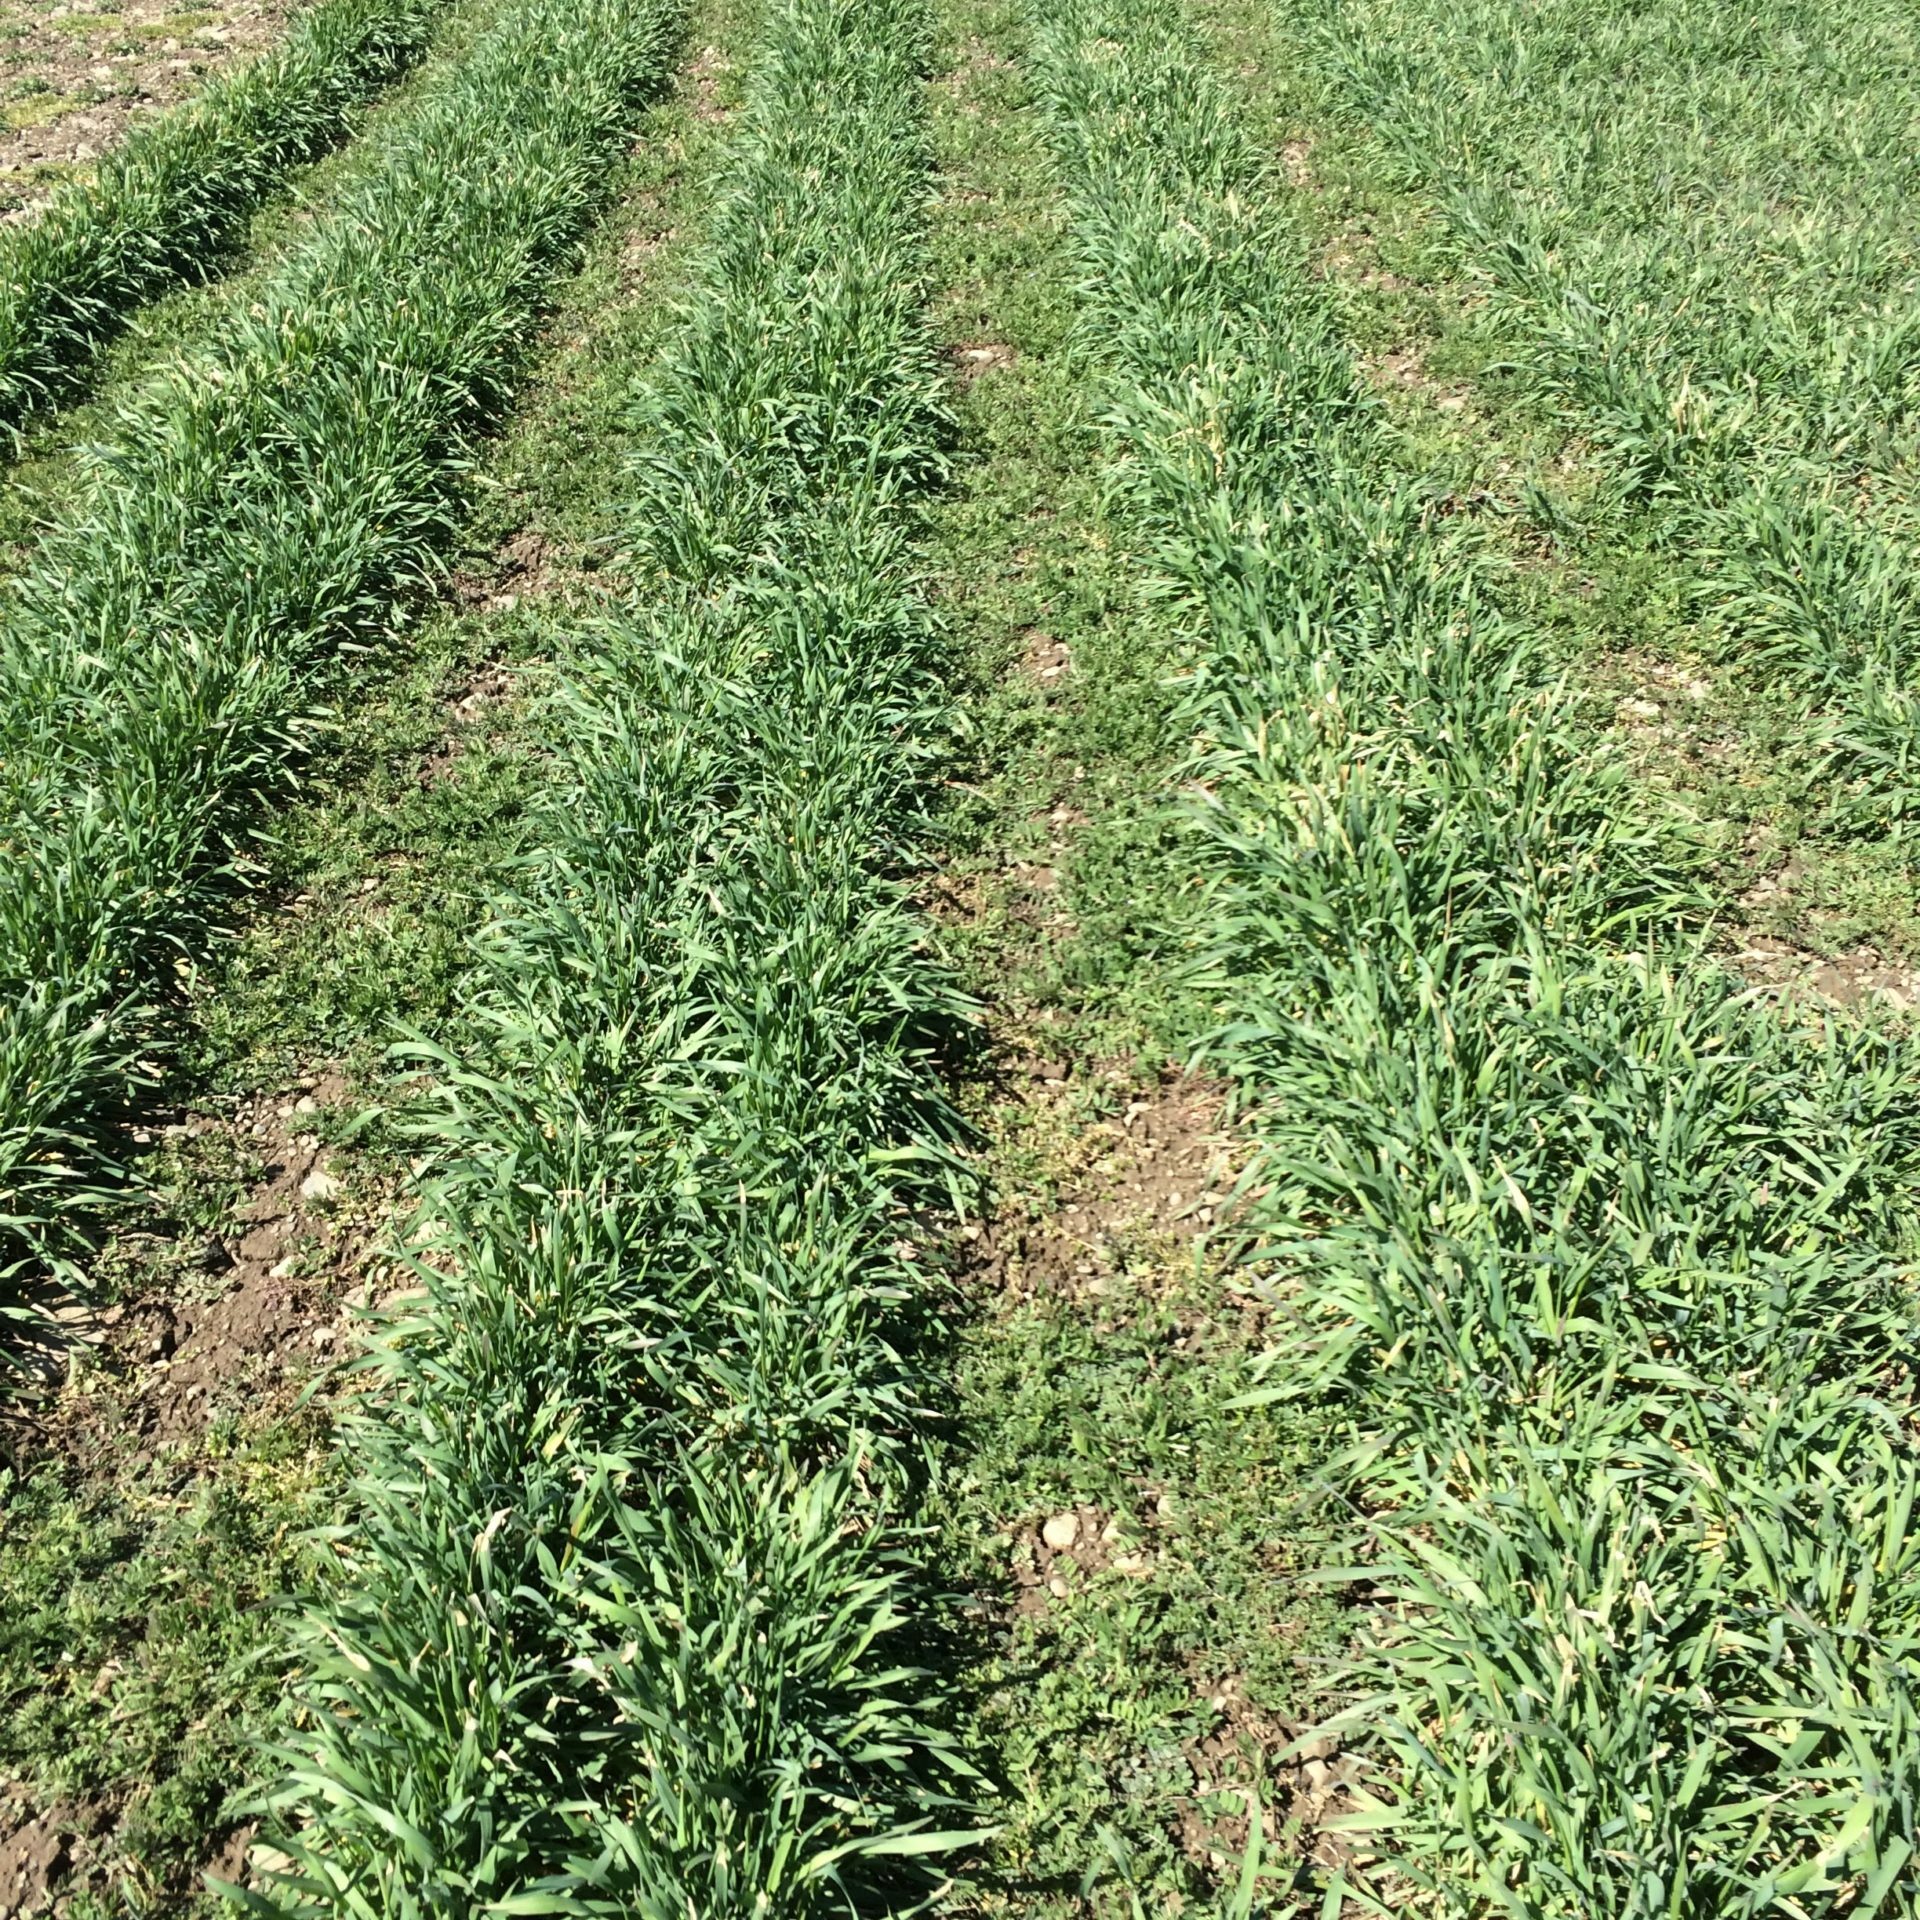 Strip planted cereal rye and hairy vetch where the nitrogen rich vetch is concentrated in the planting row. Our research found little to no benefit to strip planting vs standard mixed plantings. 